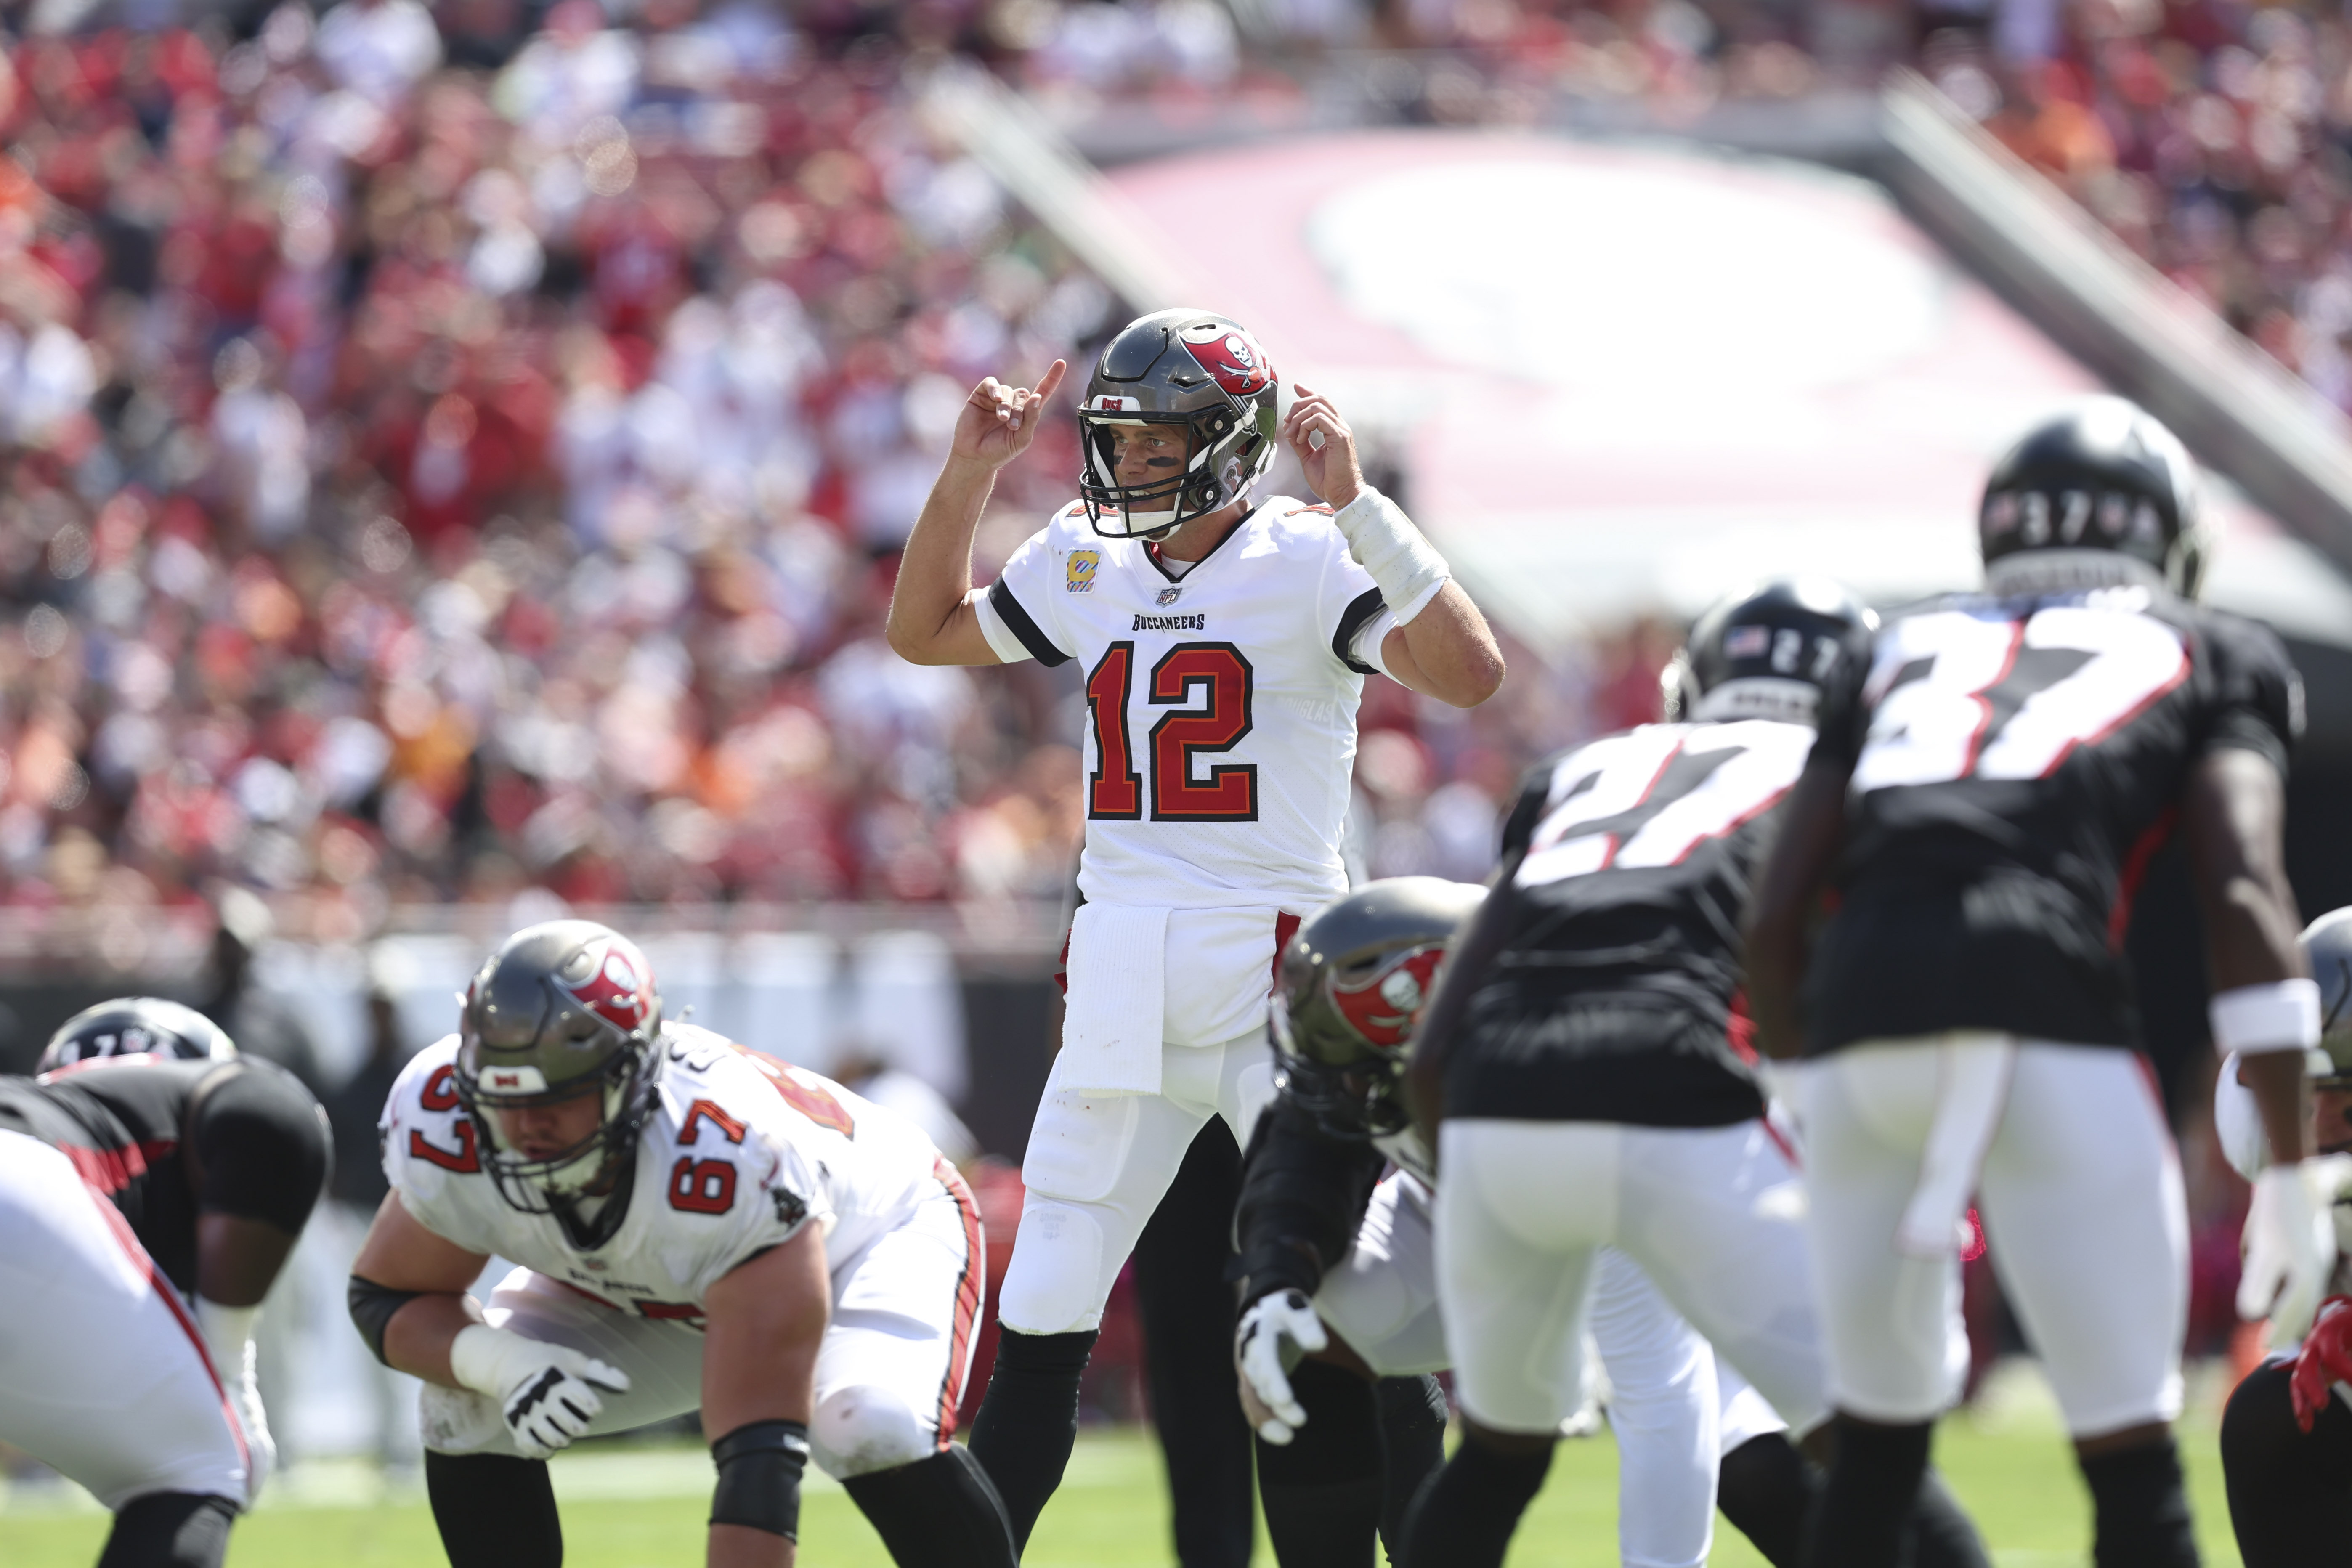 Section 642: Falcons unveil new uniforms, Bucs take their old ones